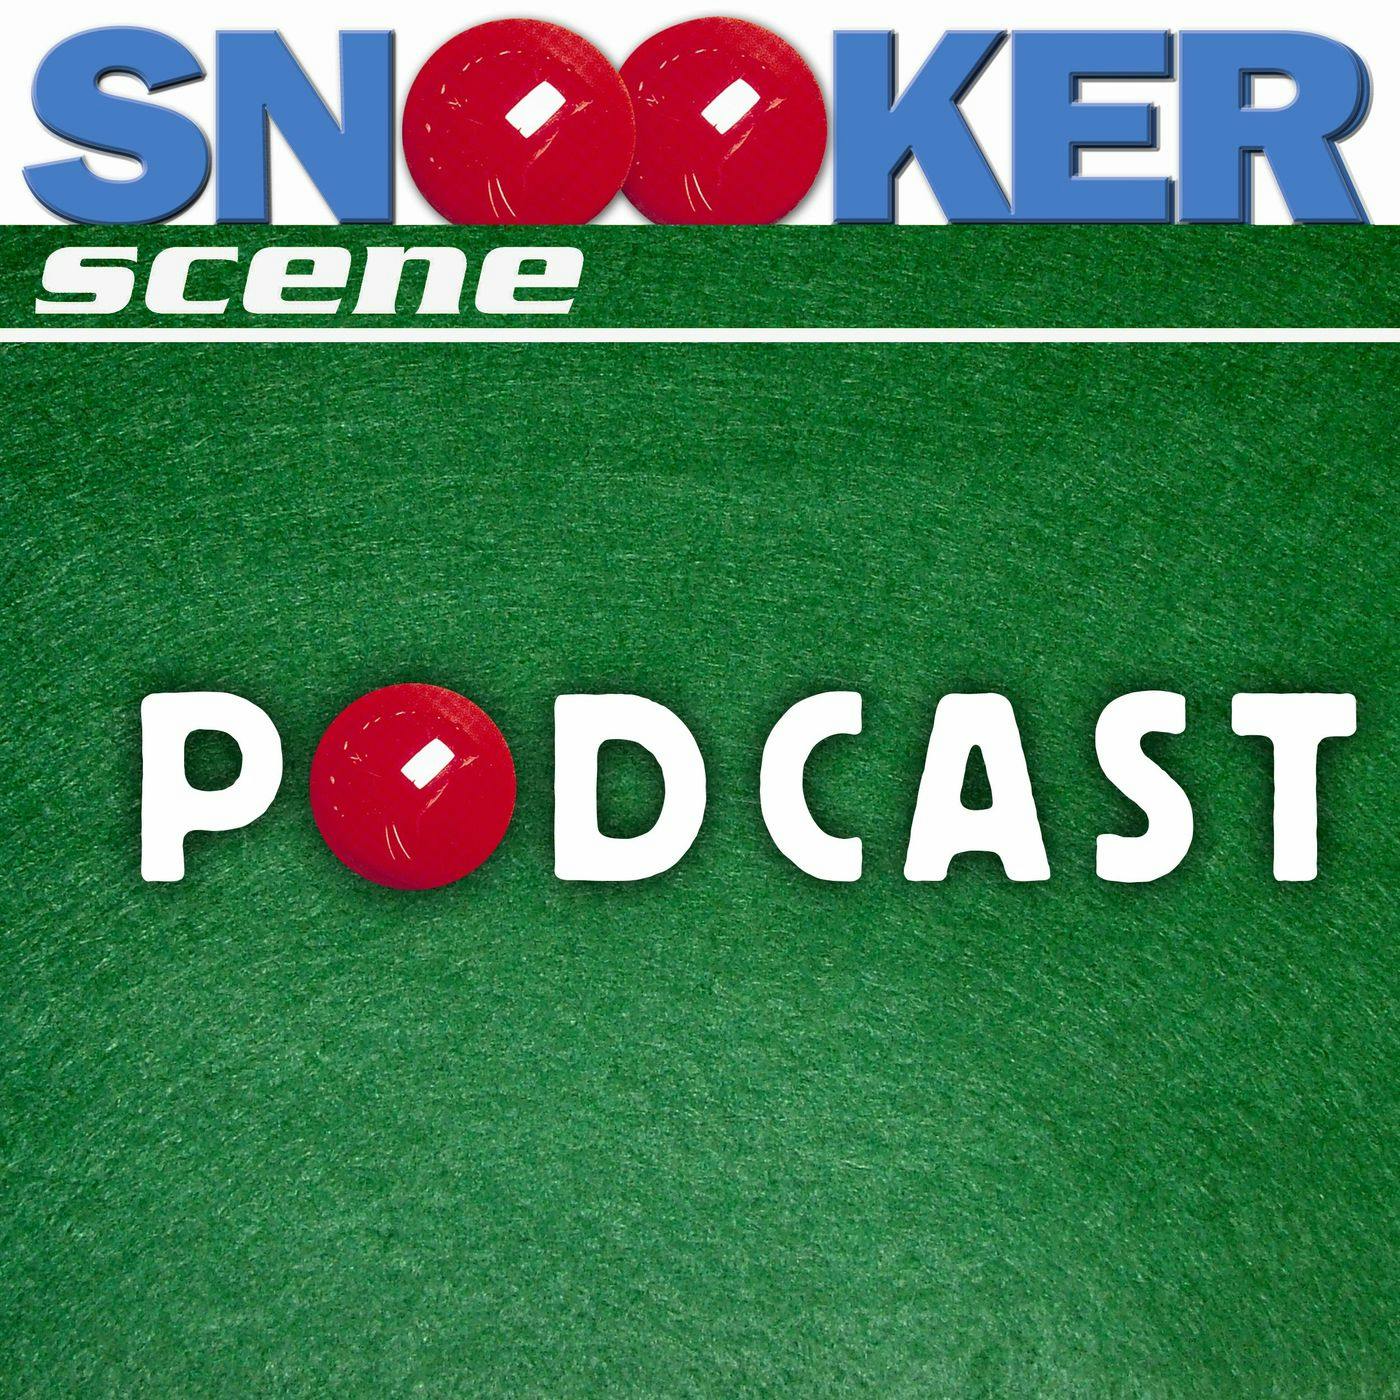 Snooker Scene Podcast episode 40 - Review of the Year